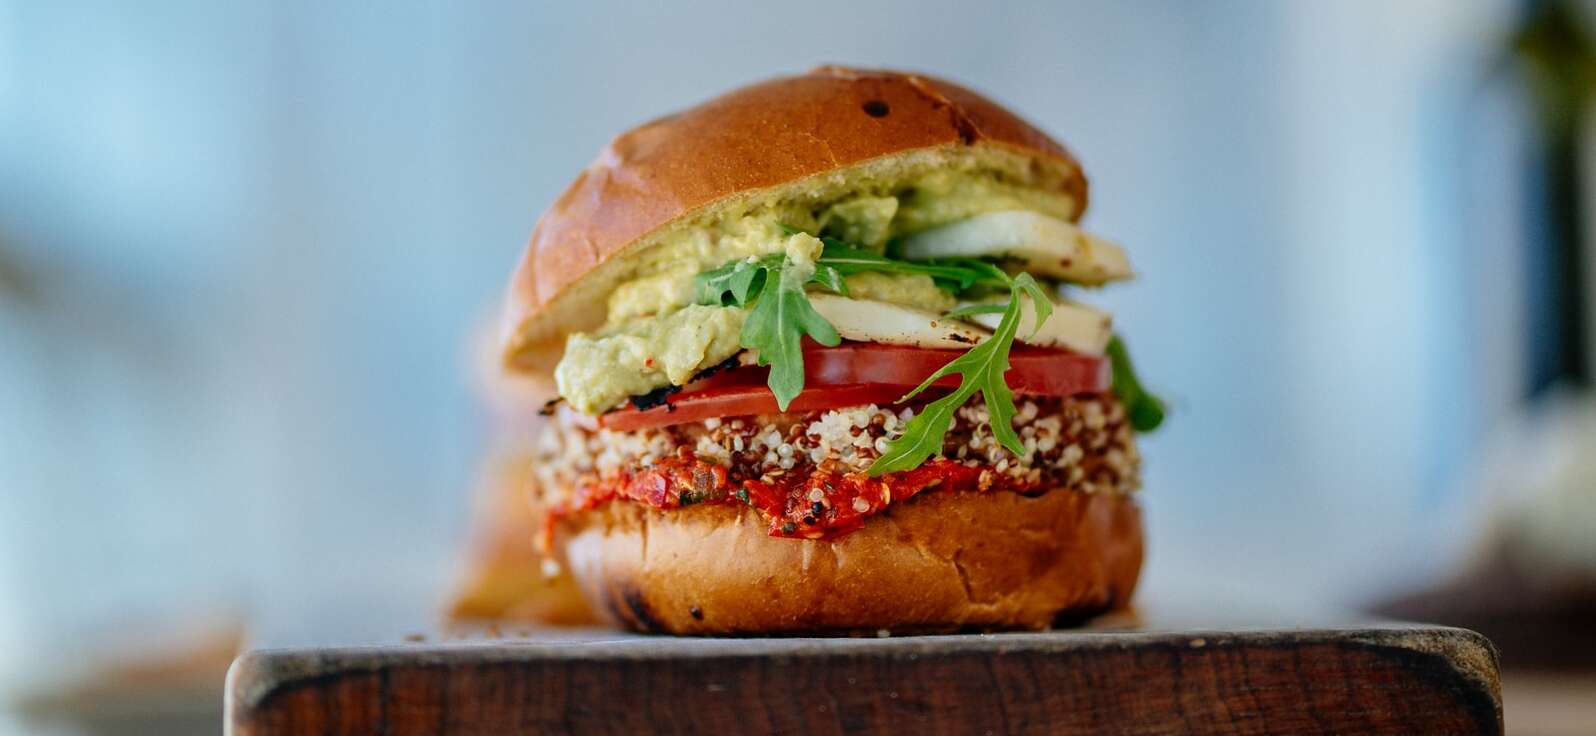 plant-based hamburger with sliced tomatoes and vegetables